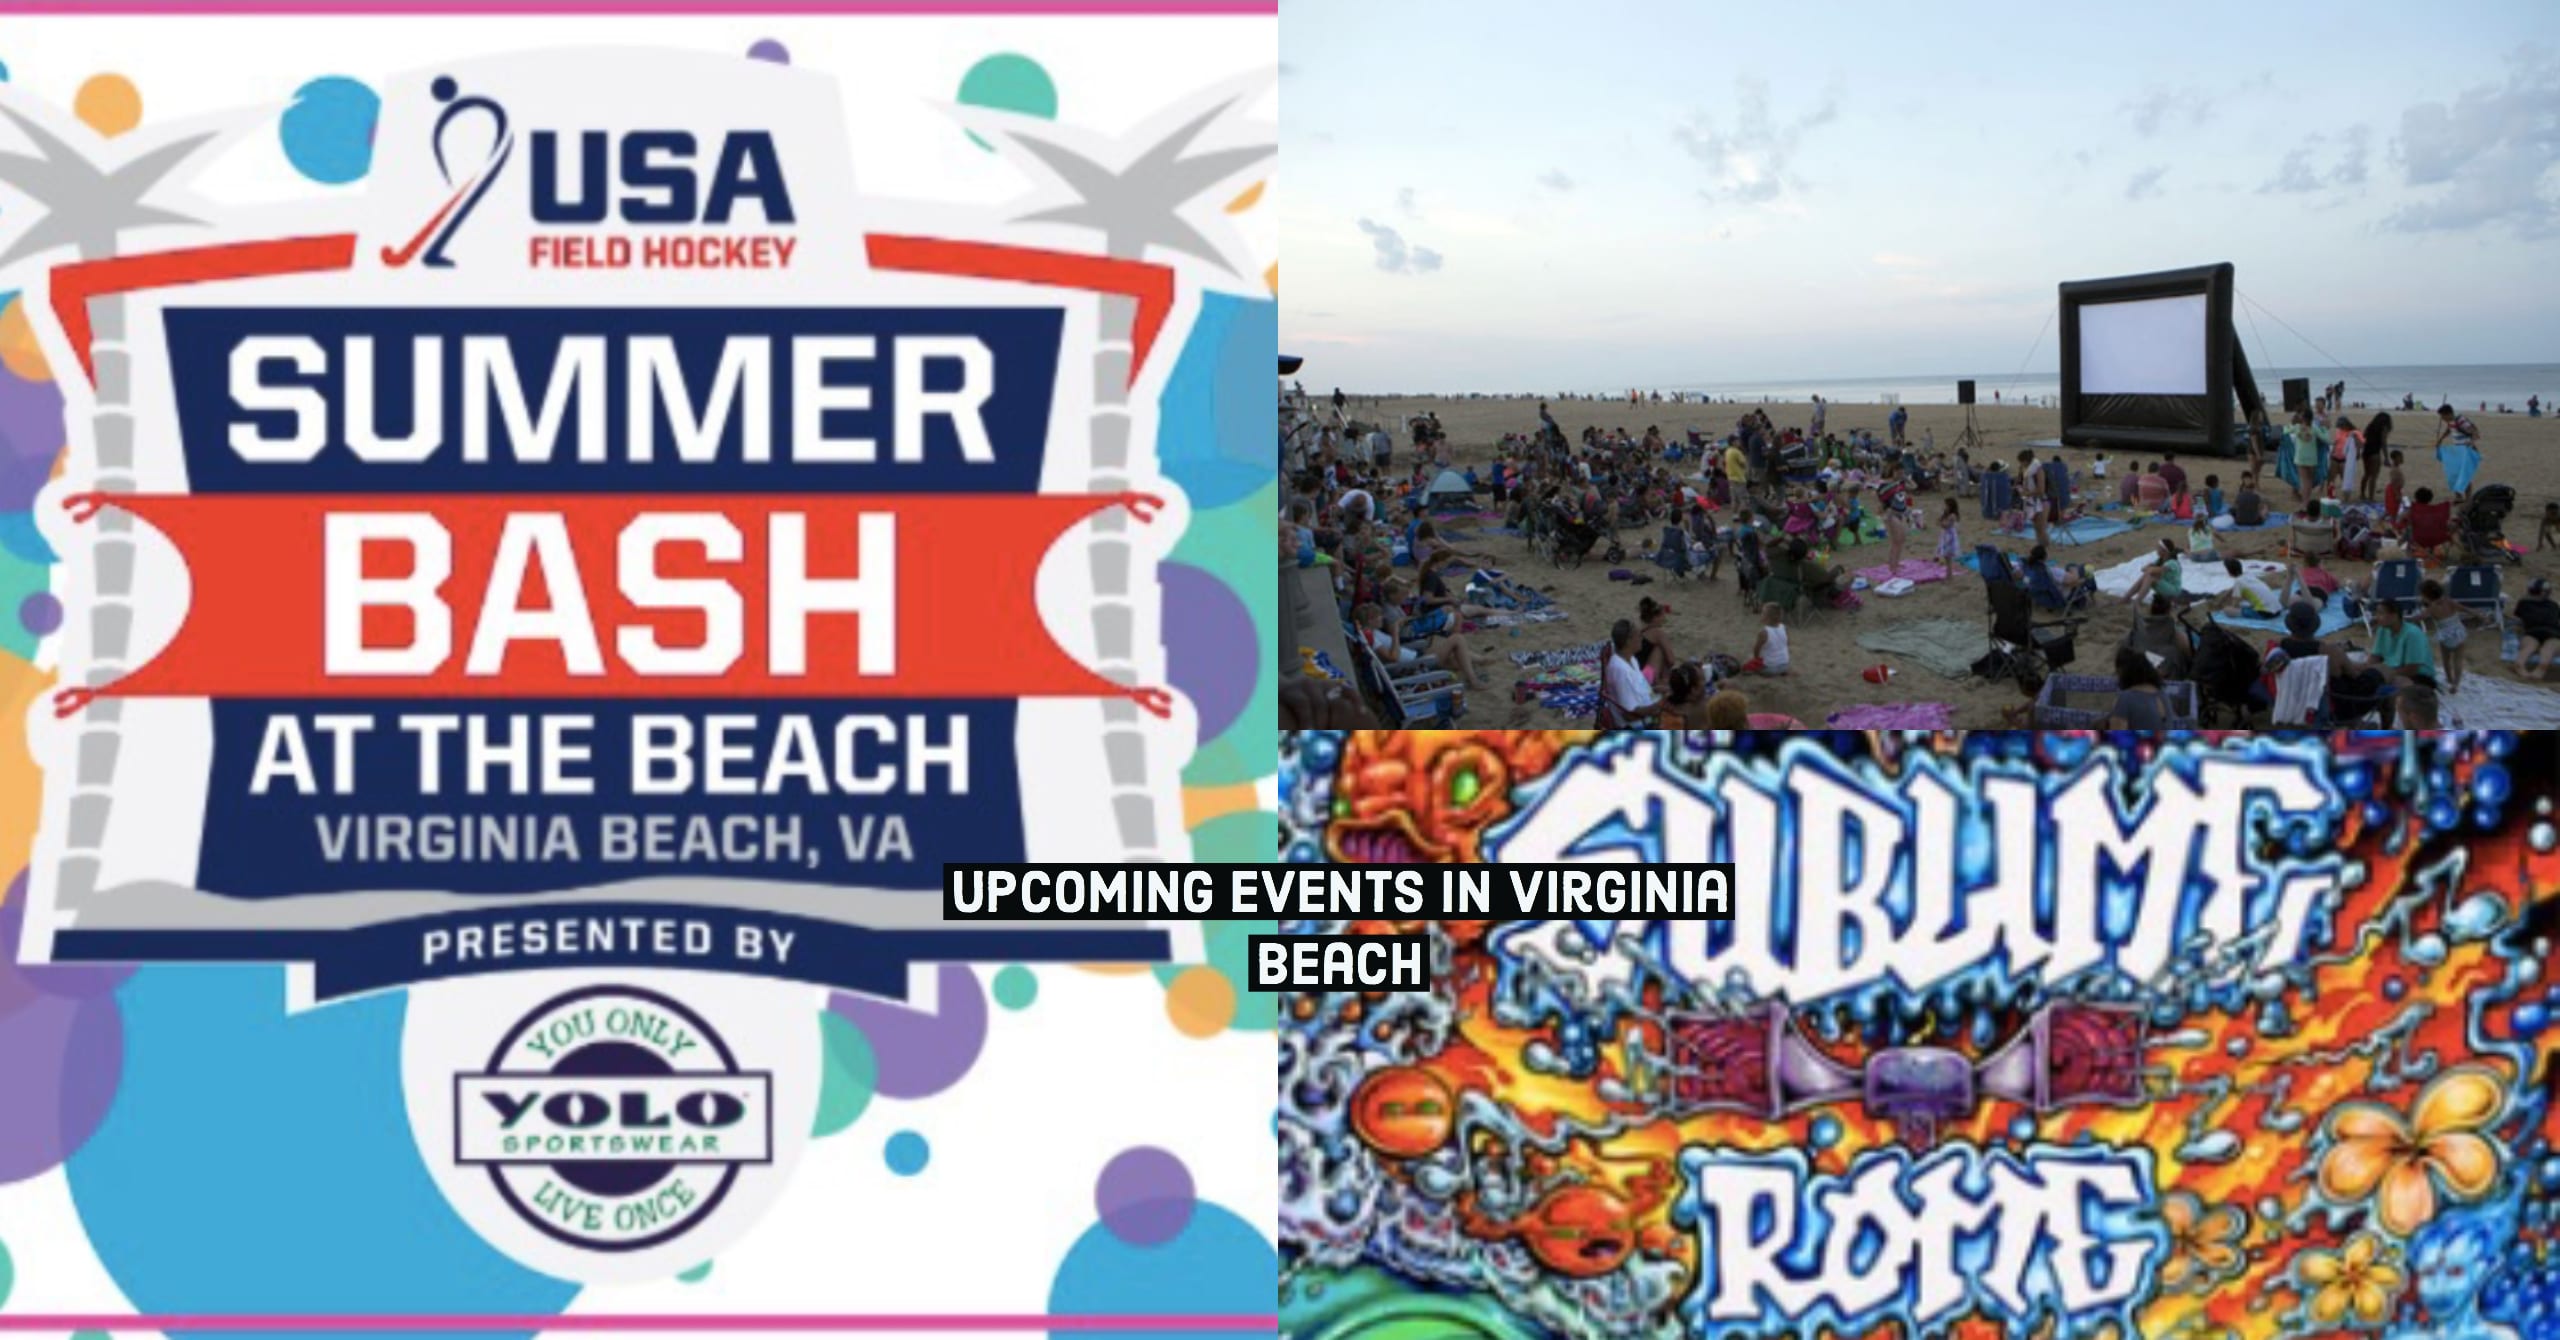 Upcoming Events – Movies, Concerts, Sports, Family Adventure | Virginia Beach Hotels - Oceanfront